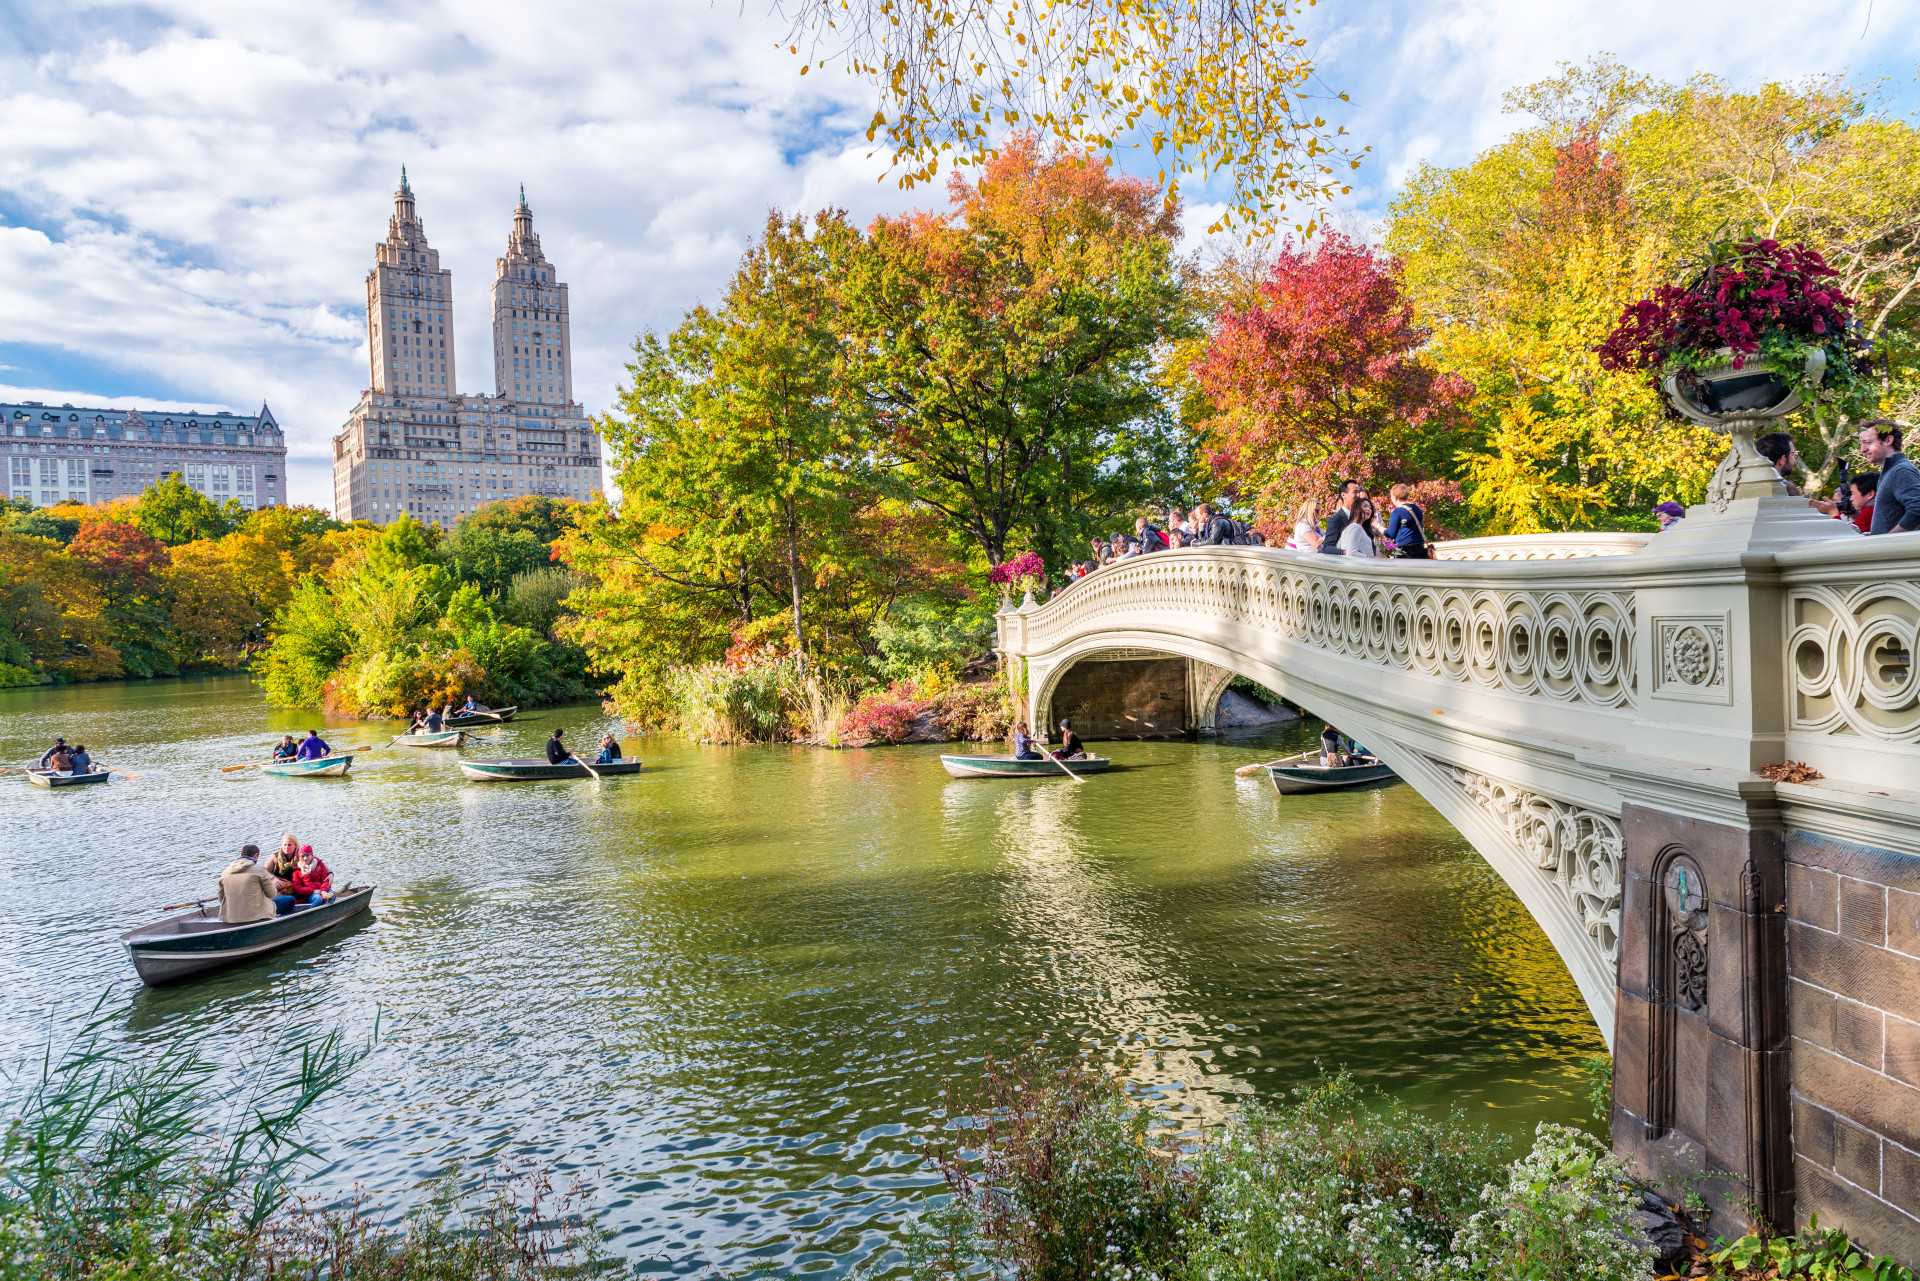 Head to Central Park for a longer stroll, and get in touch with nature in the center of one of the busiest cities in the world!<p>You may also like:<a href="https://www.starsinsider.com/n/254426?utm_source=msn.com&utm_medium=display&utm_campaign=referral_description&utm_content=208346v2en-sg"> Hearts of gold: the most generous and charitable celebs </a></p>